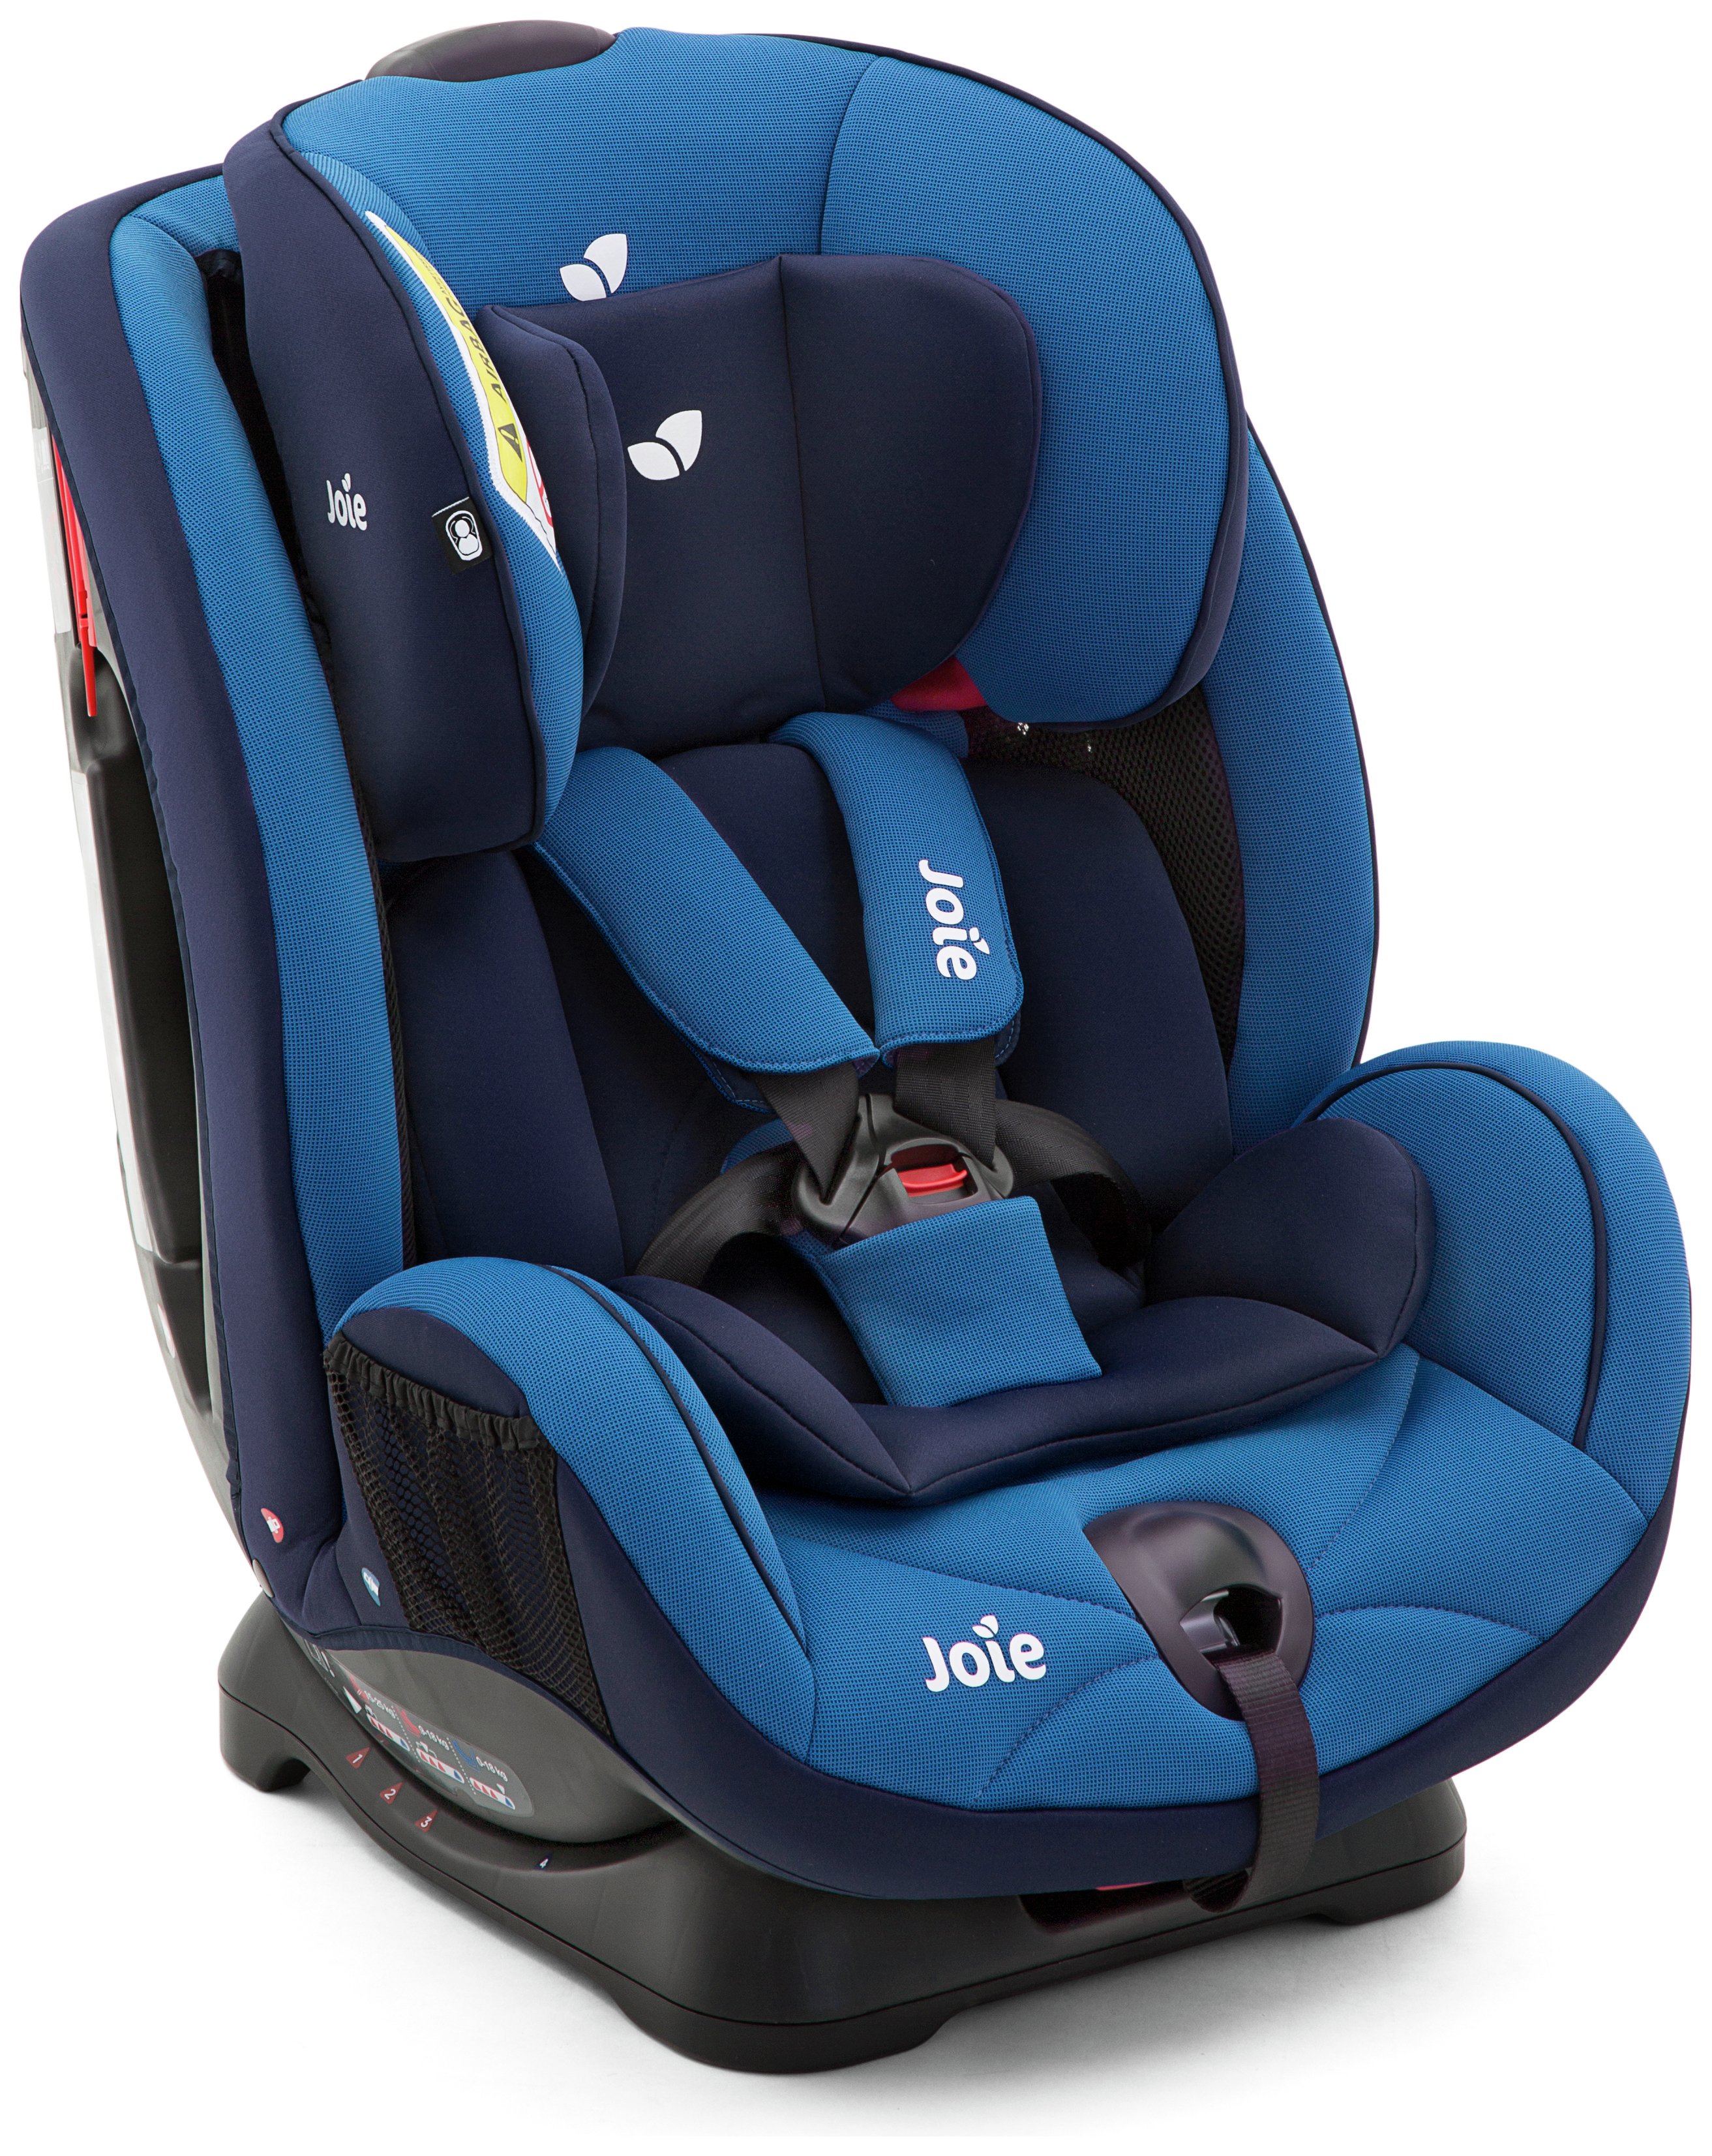 Joie Stages Group 0+/1/2 Car Seat Reviews